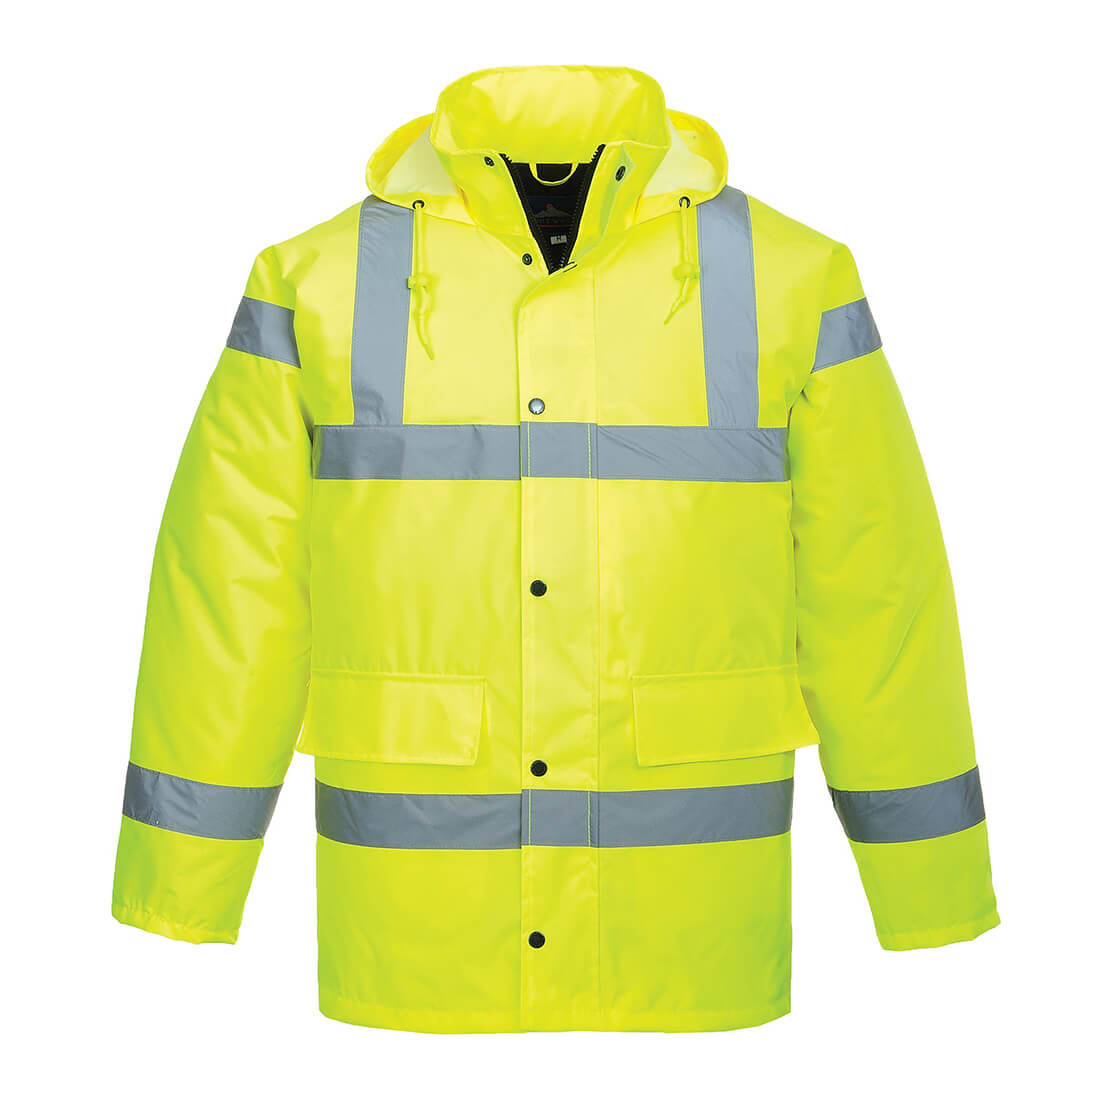 Image of Oxford Weave 300D Class 3 Hi Vis Traffic Jacket Yellow 6XL